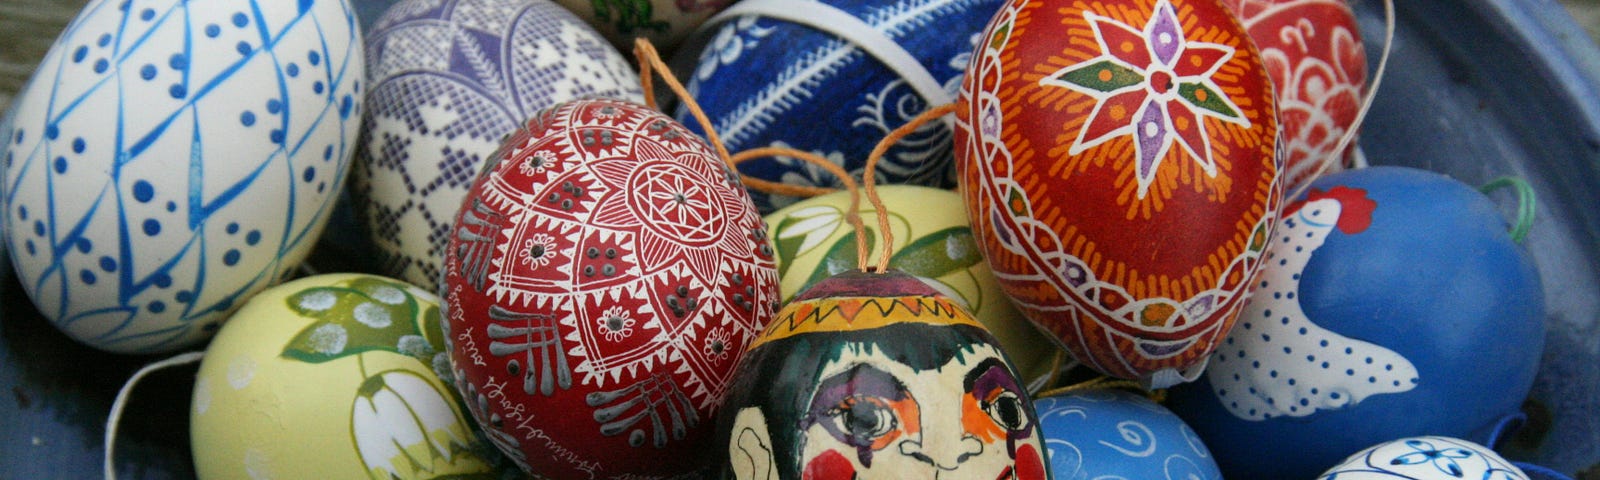 A plate of elborately decorated Easter eggs